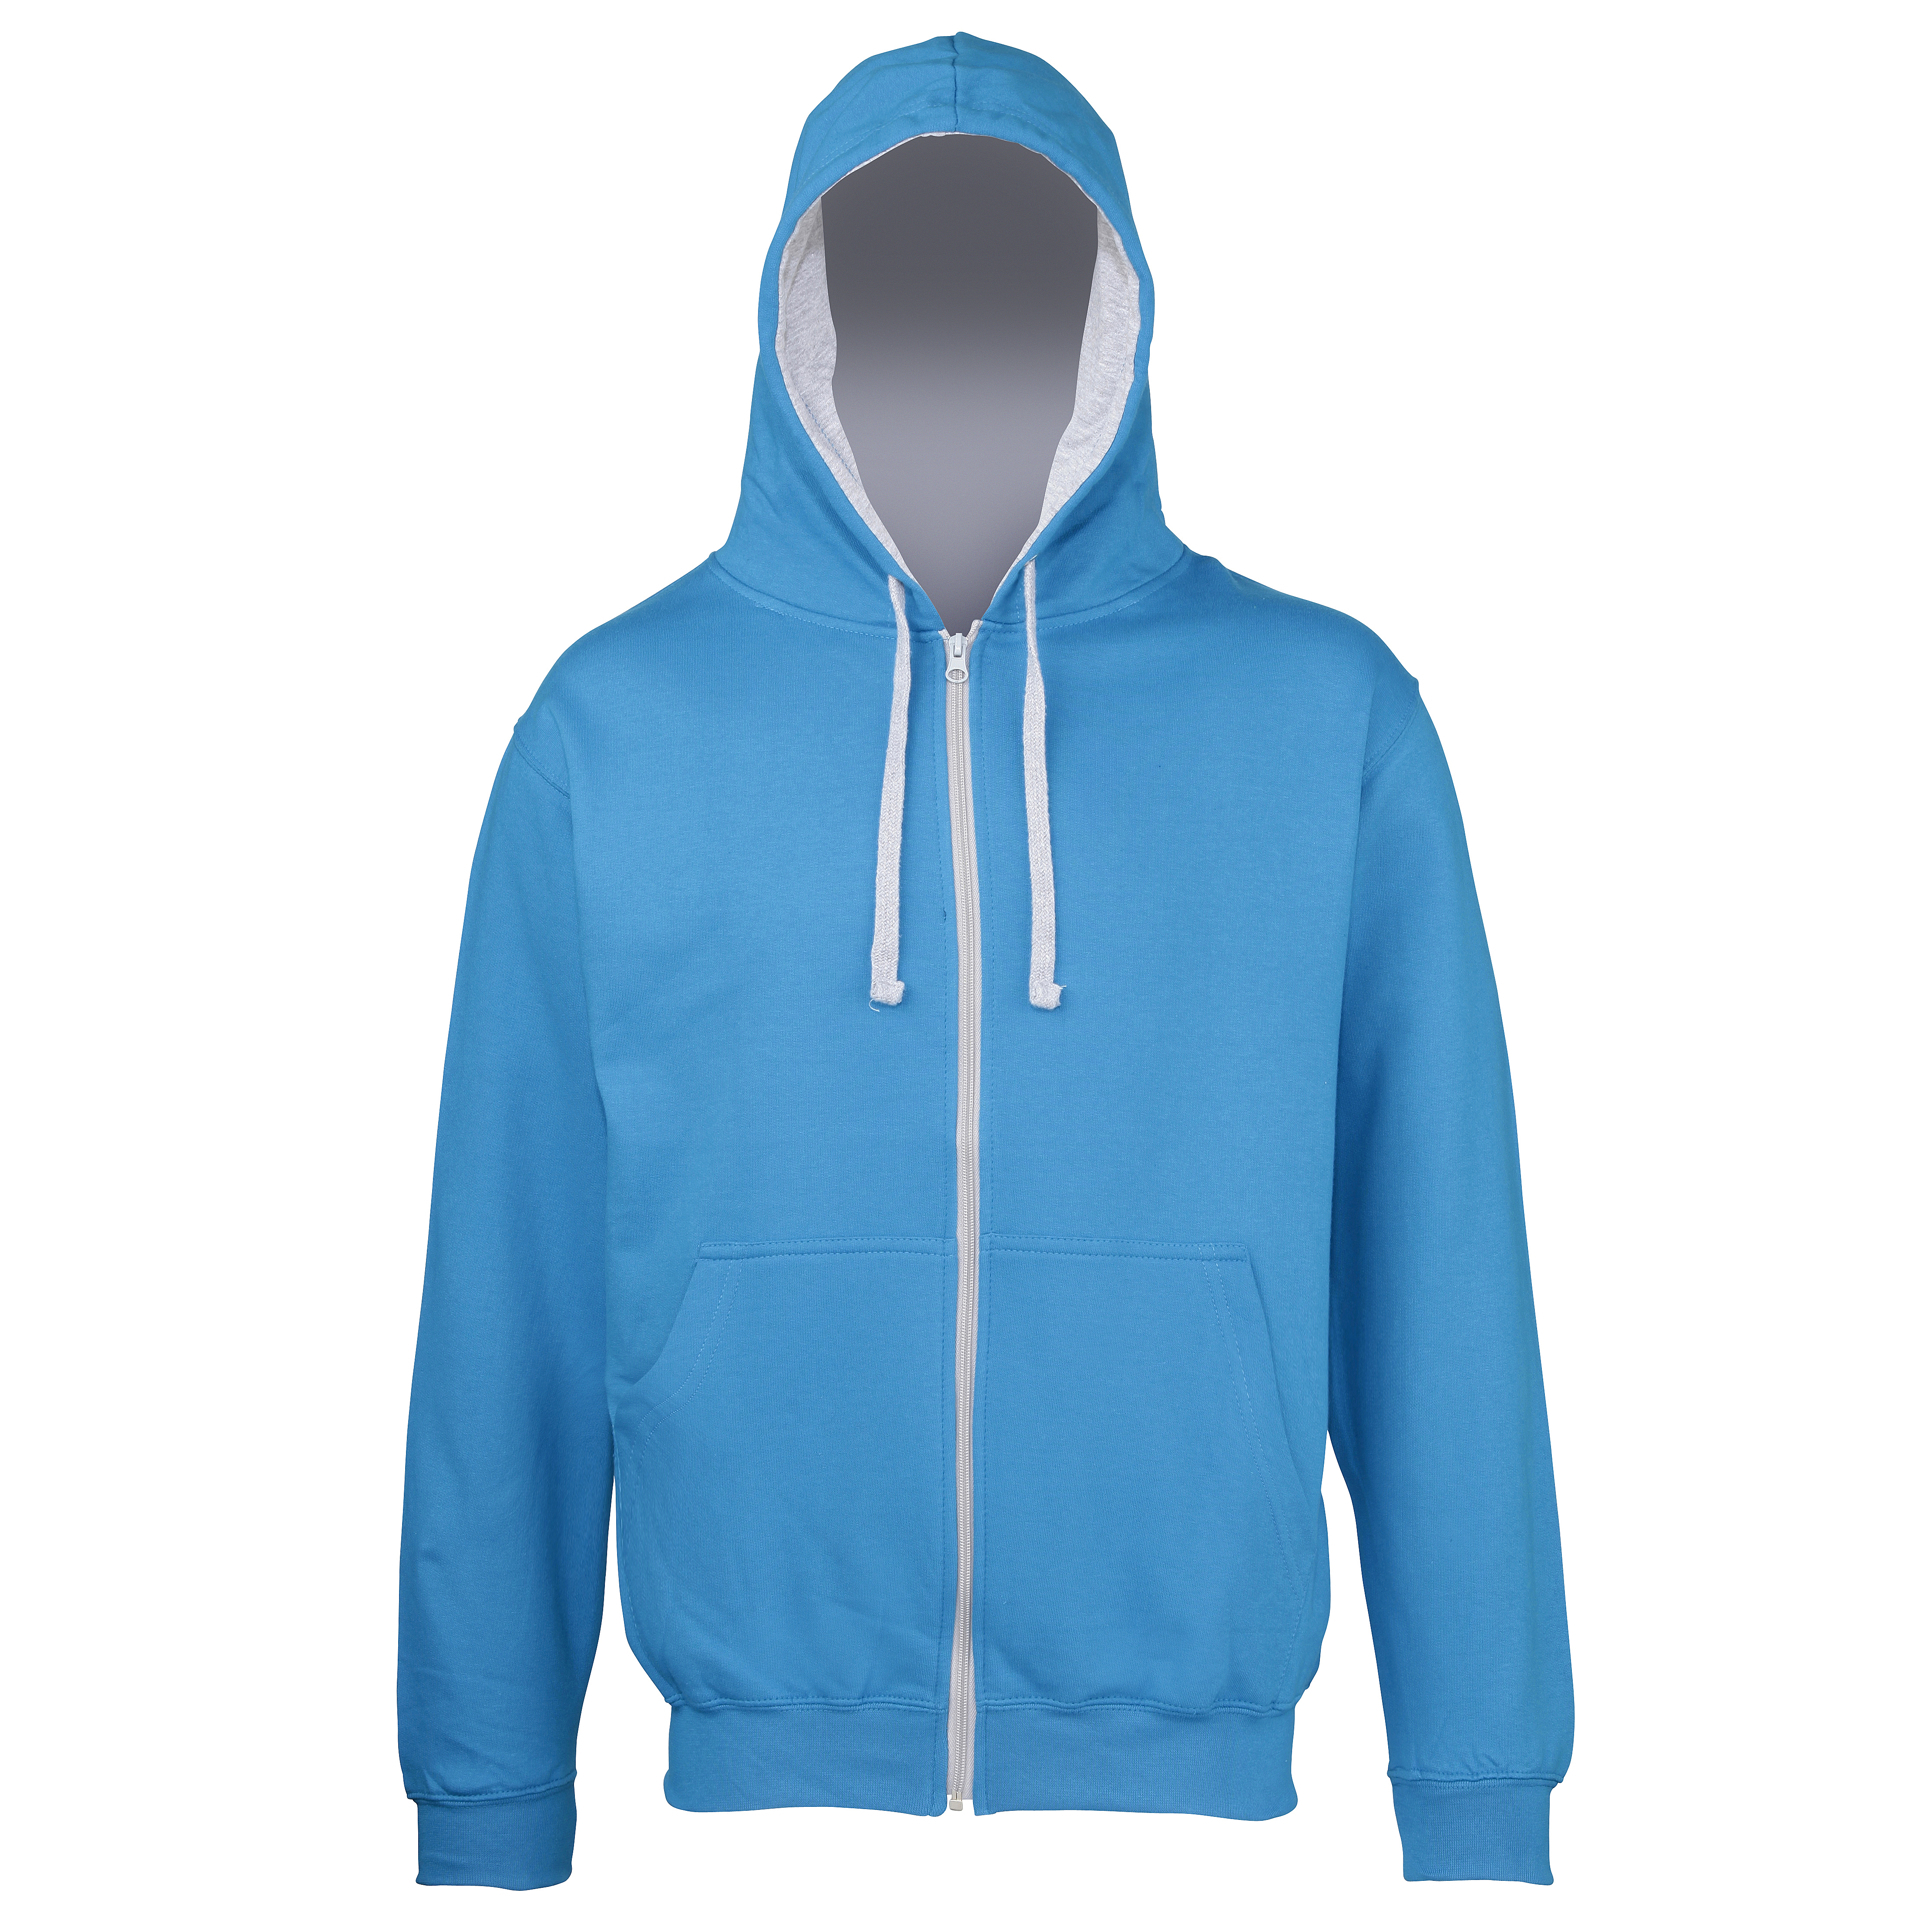 Men's Varsity Hoodie in light blue with grey details and lining